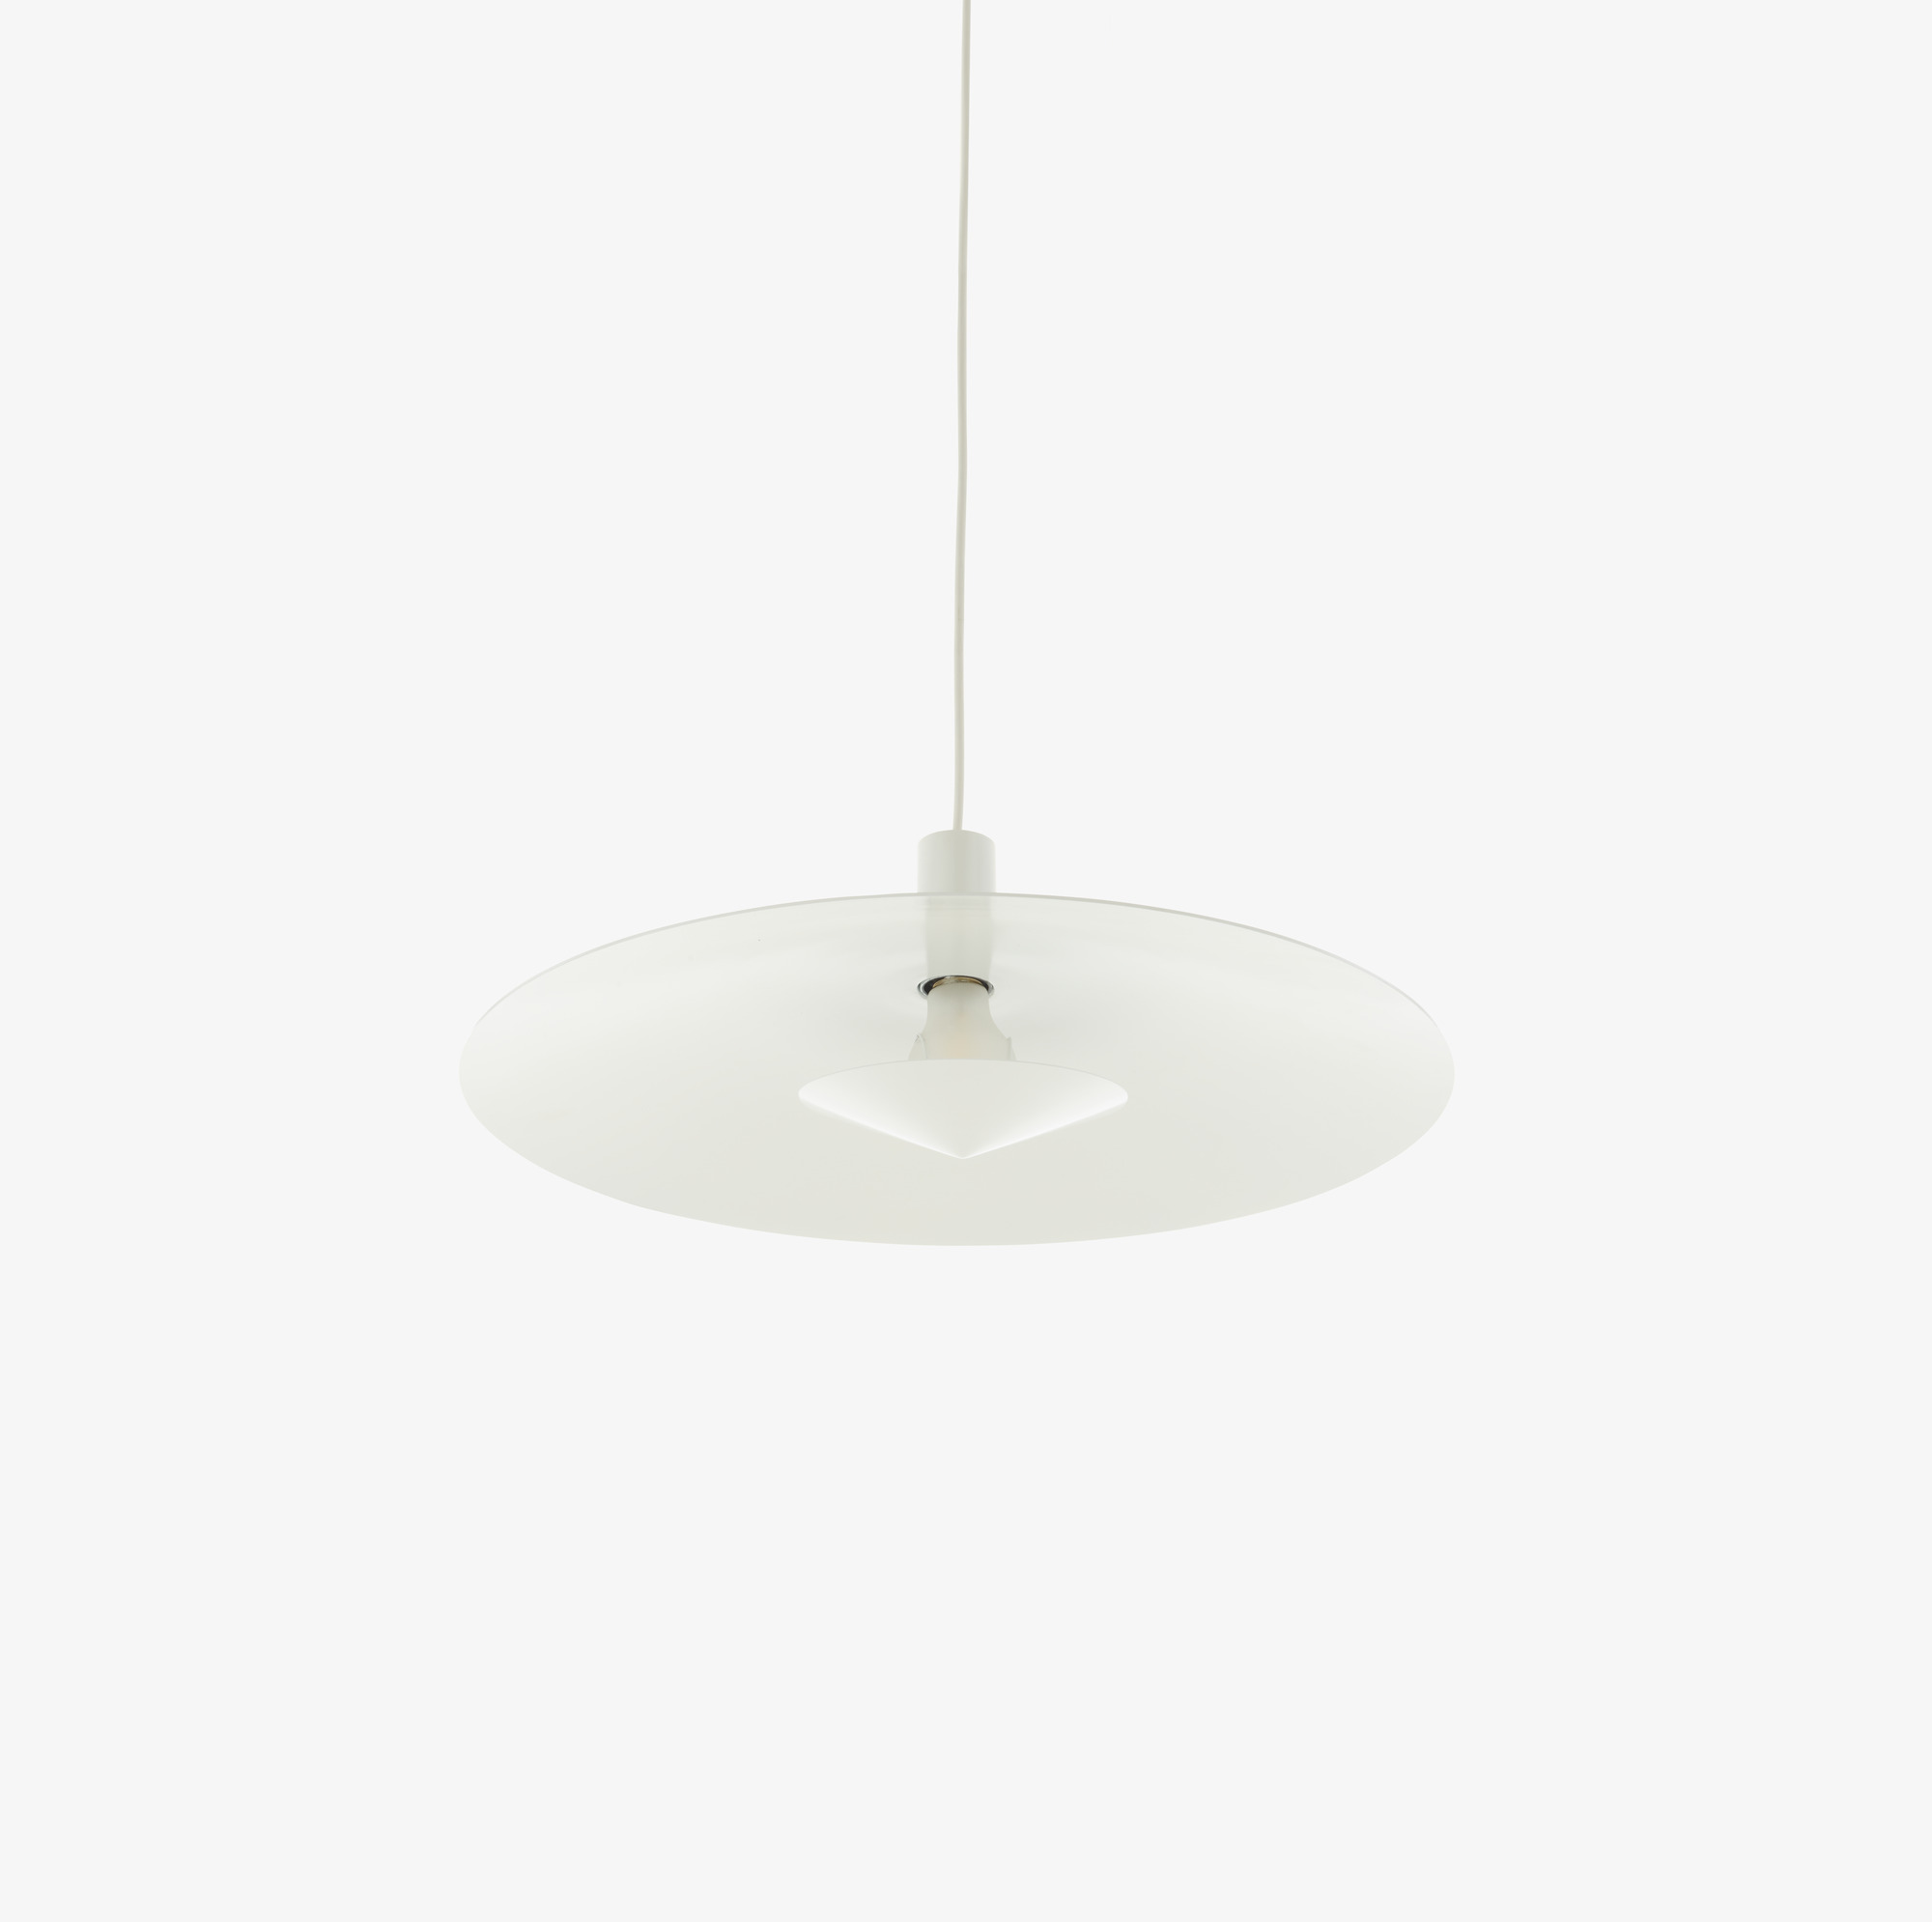 Image Suspended ceiling light   2